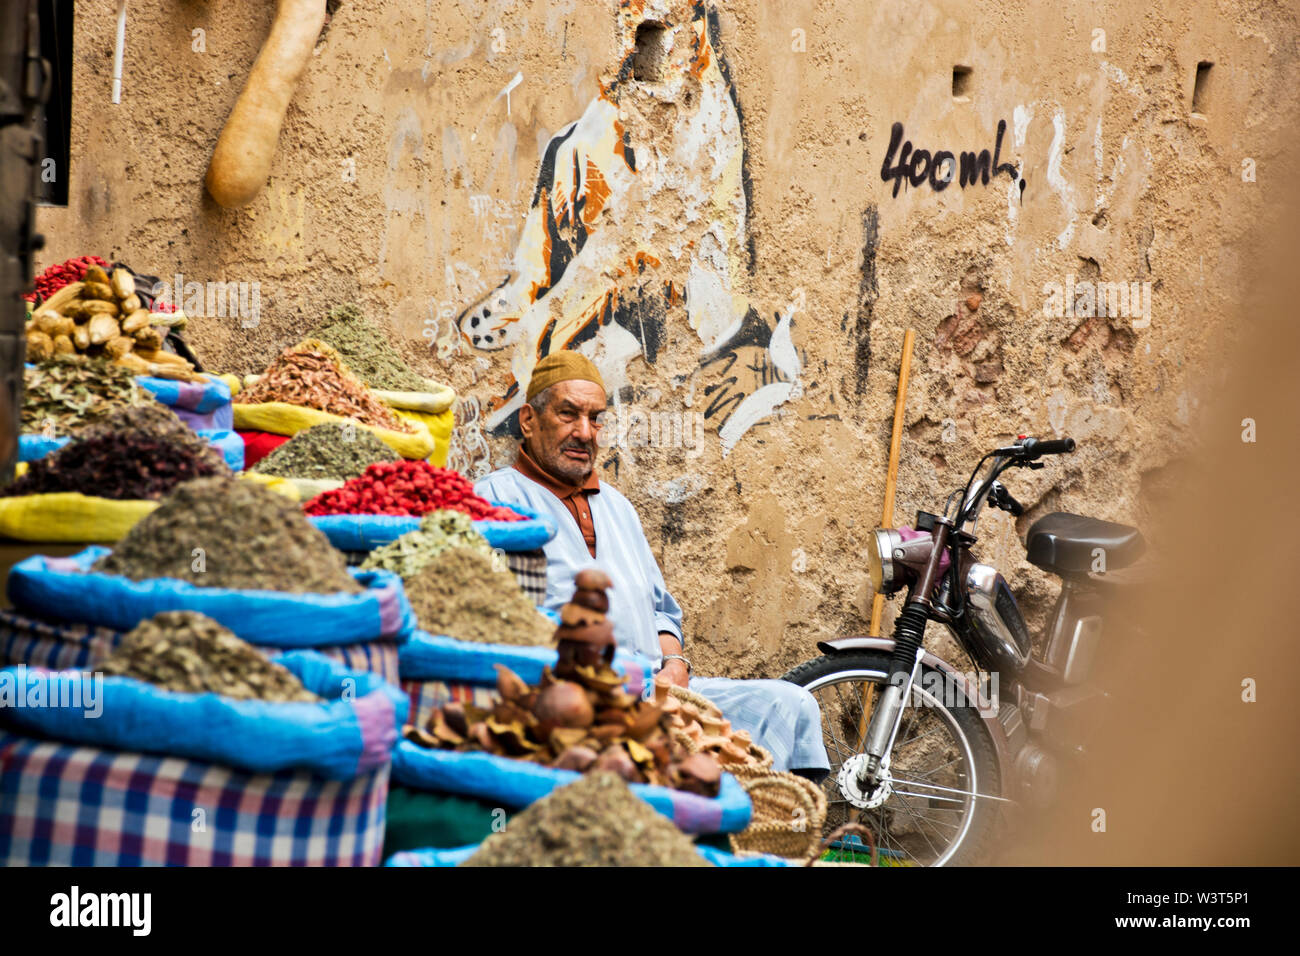 Local Moroccan man selling goods in the streets, alleyways of Marrakech going about daily arabic life in the weathered cultural Medina Stock Photo